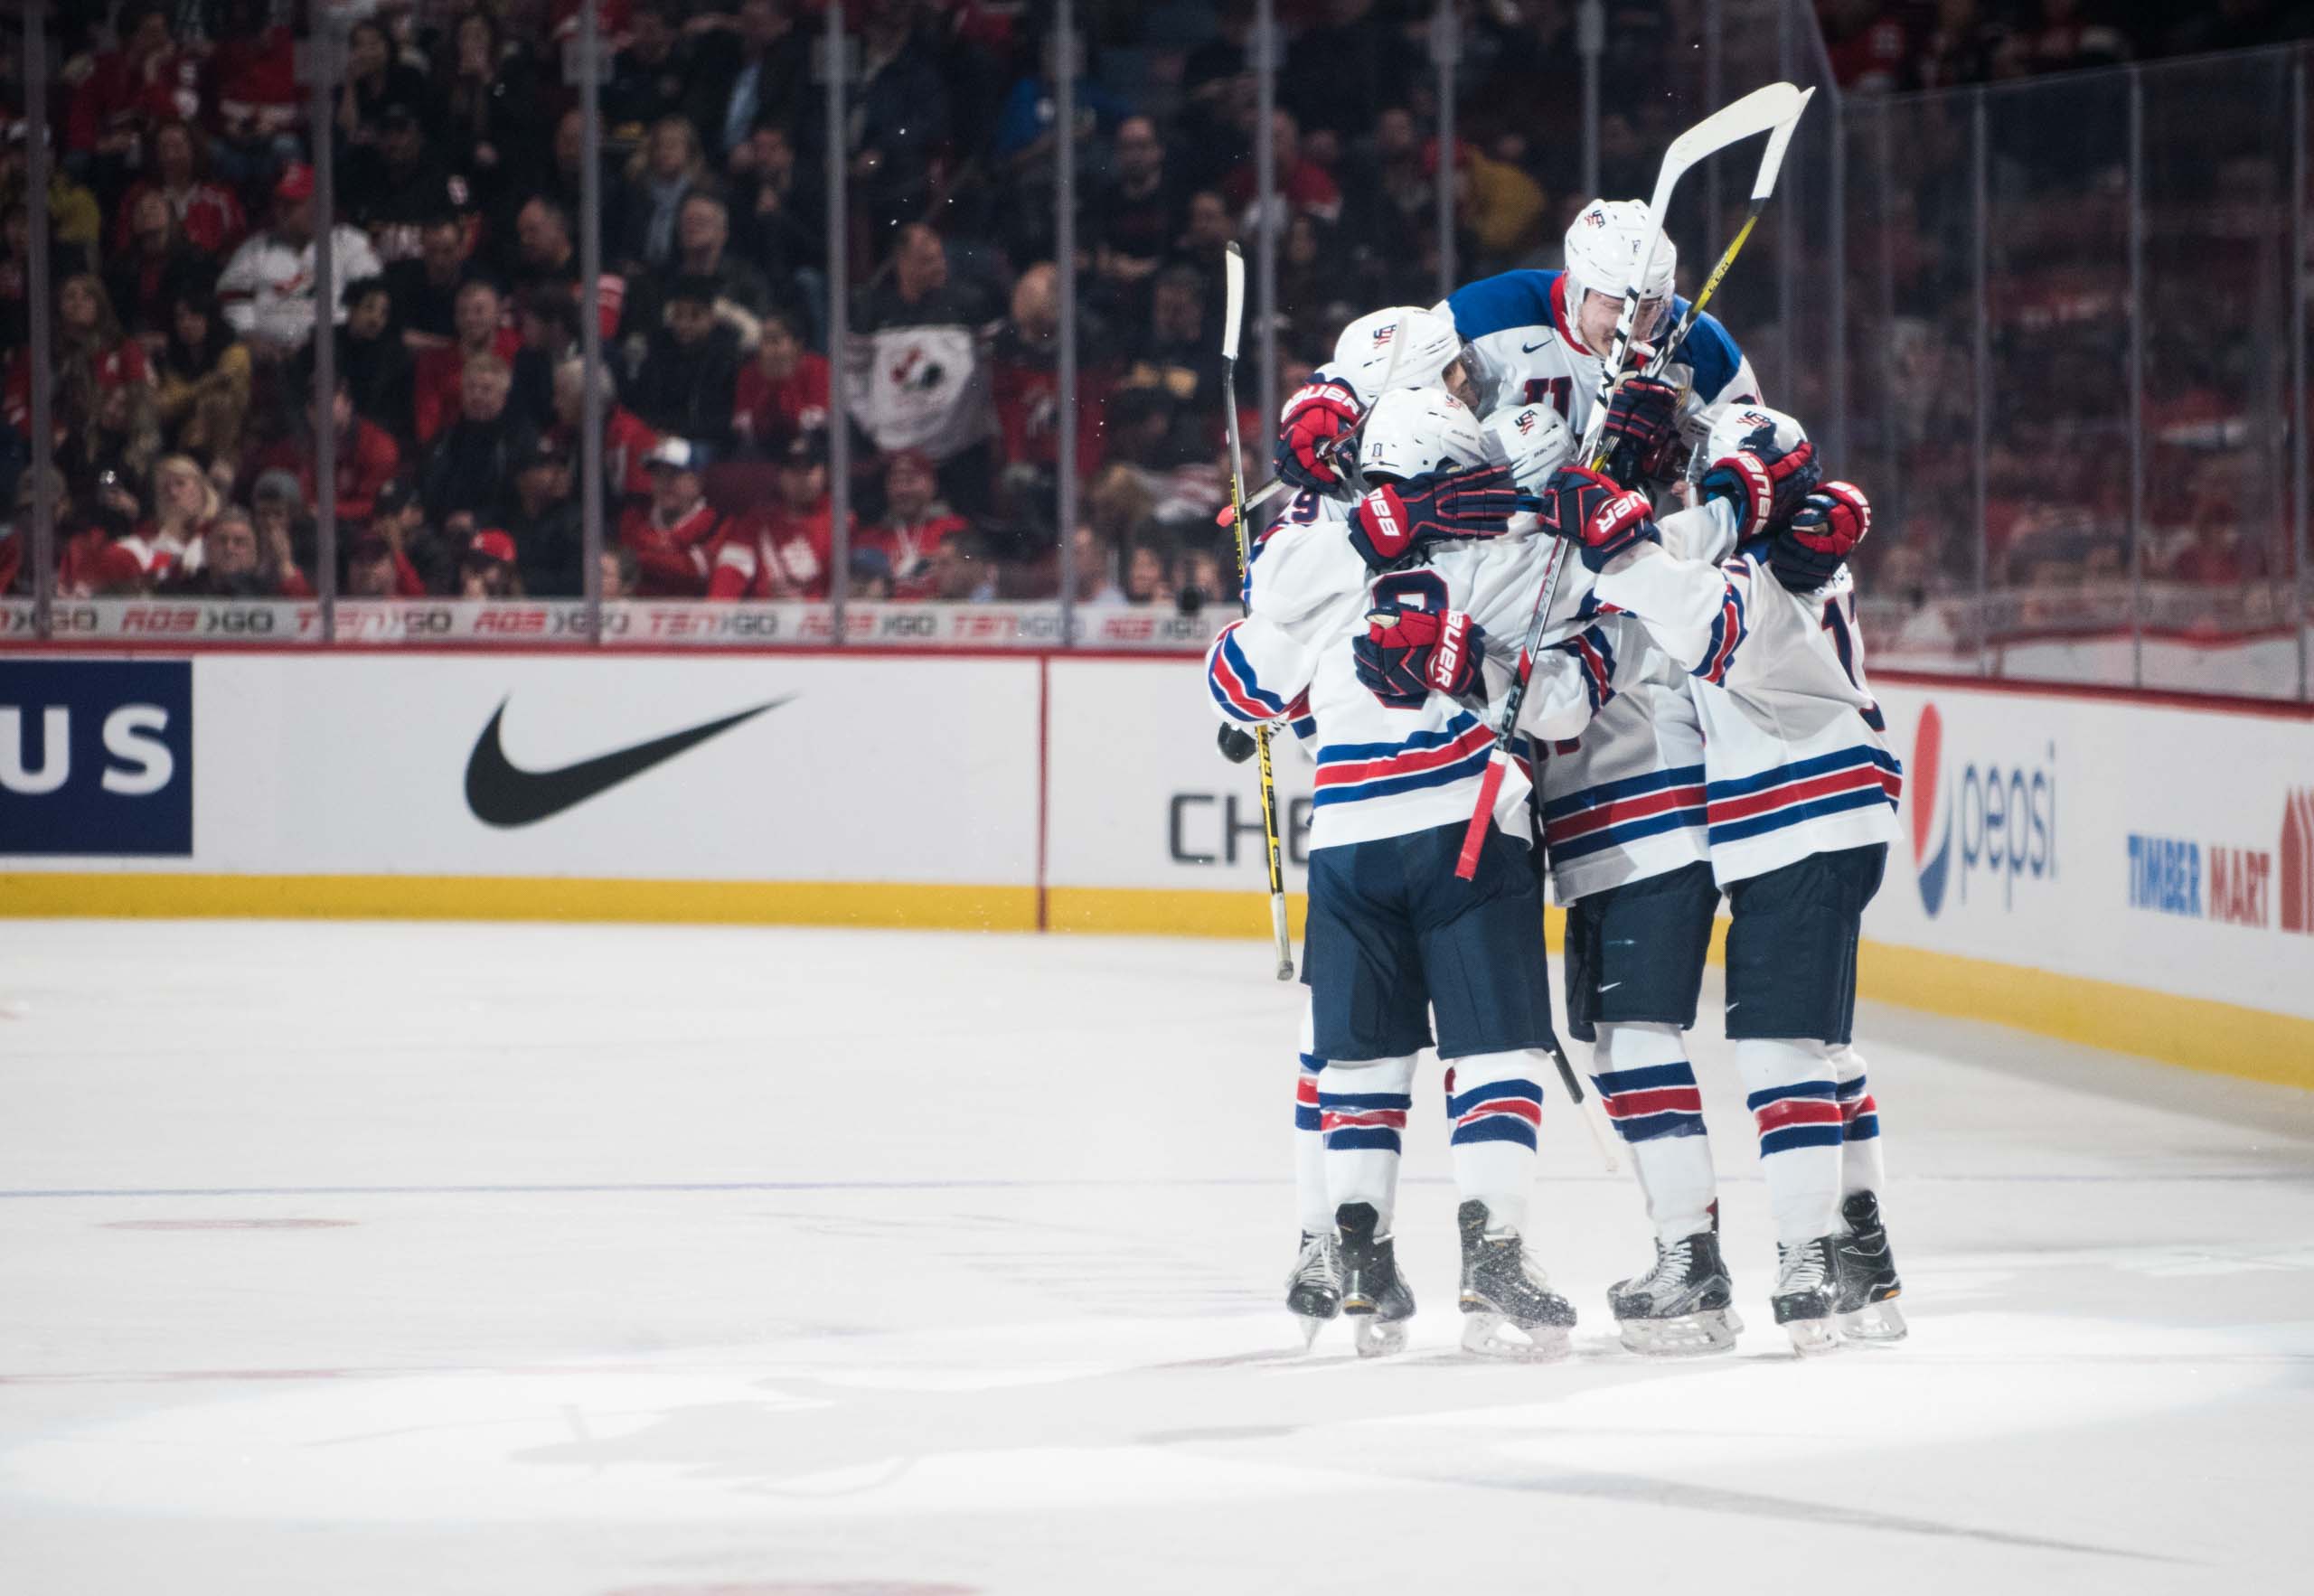 Despite falling behind 2-0 and then 4-2, the Americans were able to overcome a couple of two-goal deficits to earn the win. (Photo by Julien Grimard)